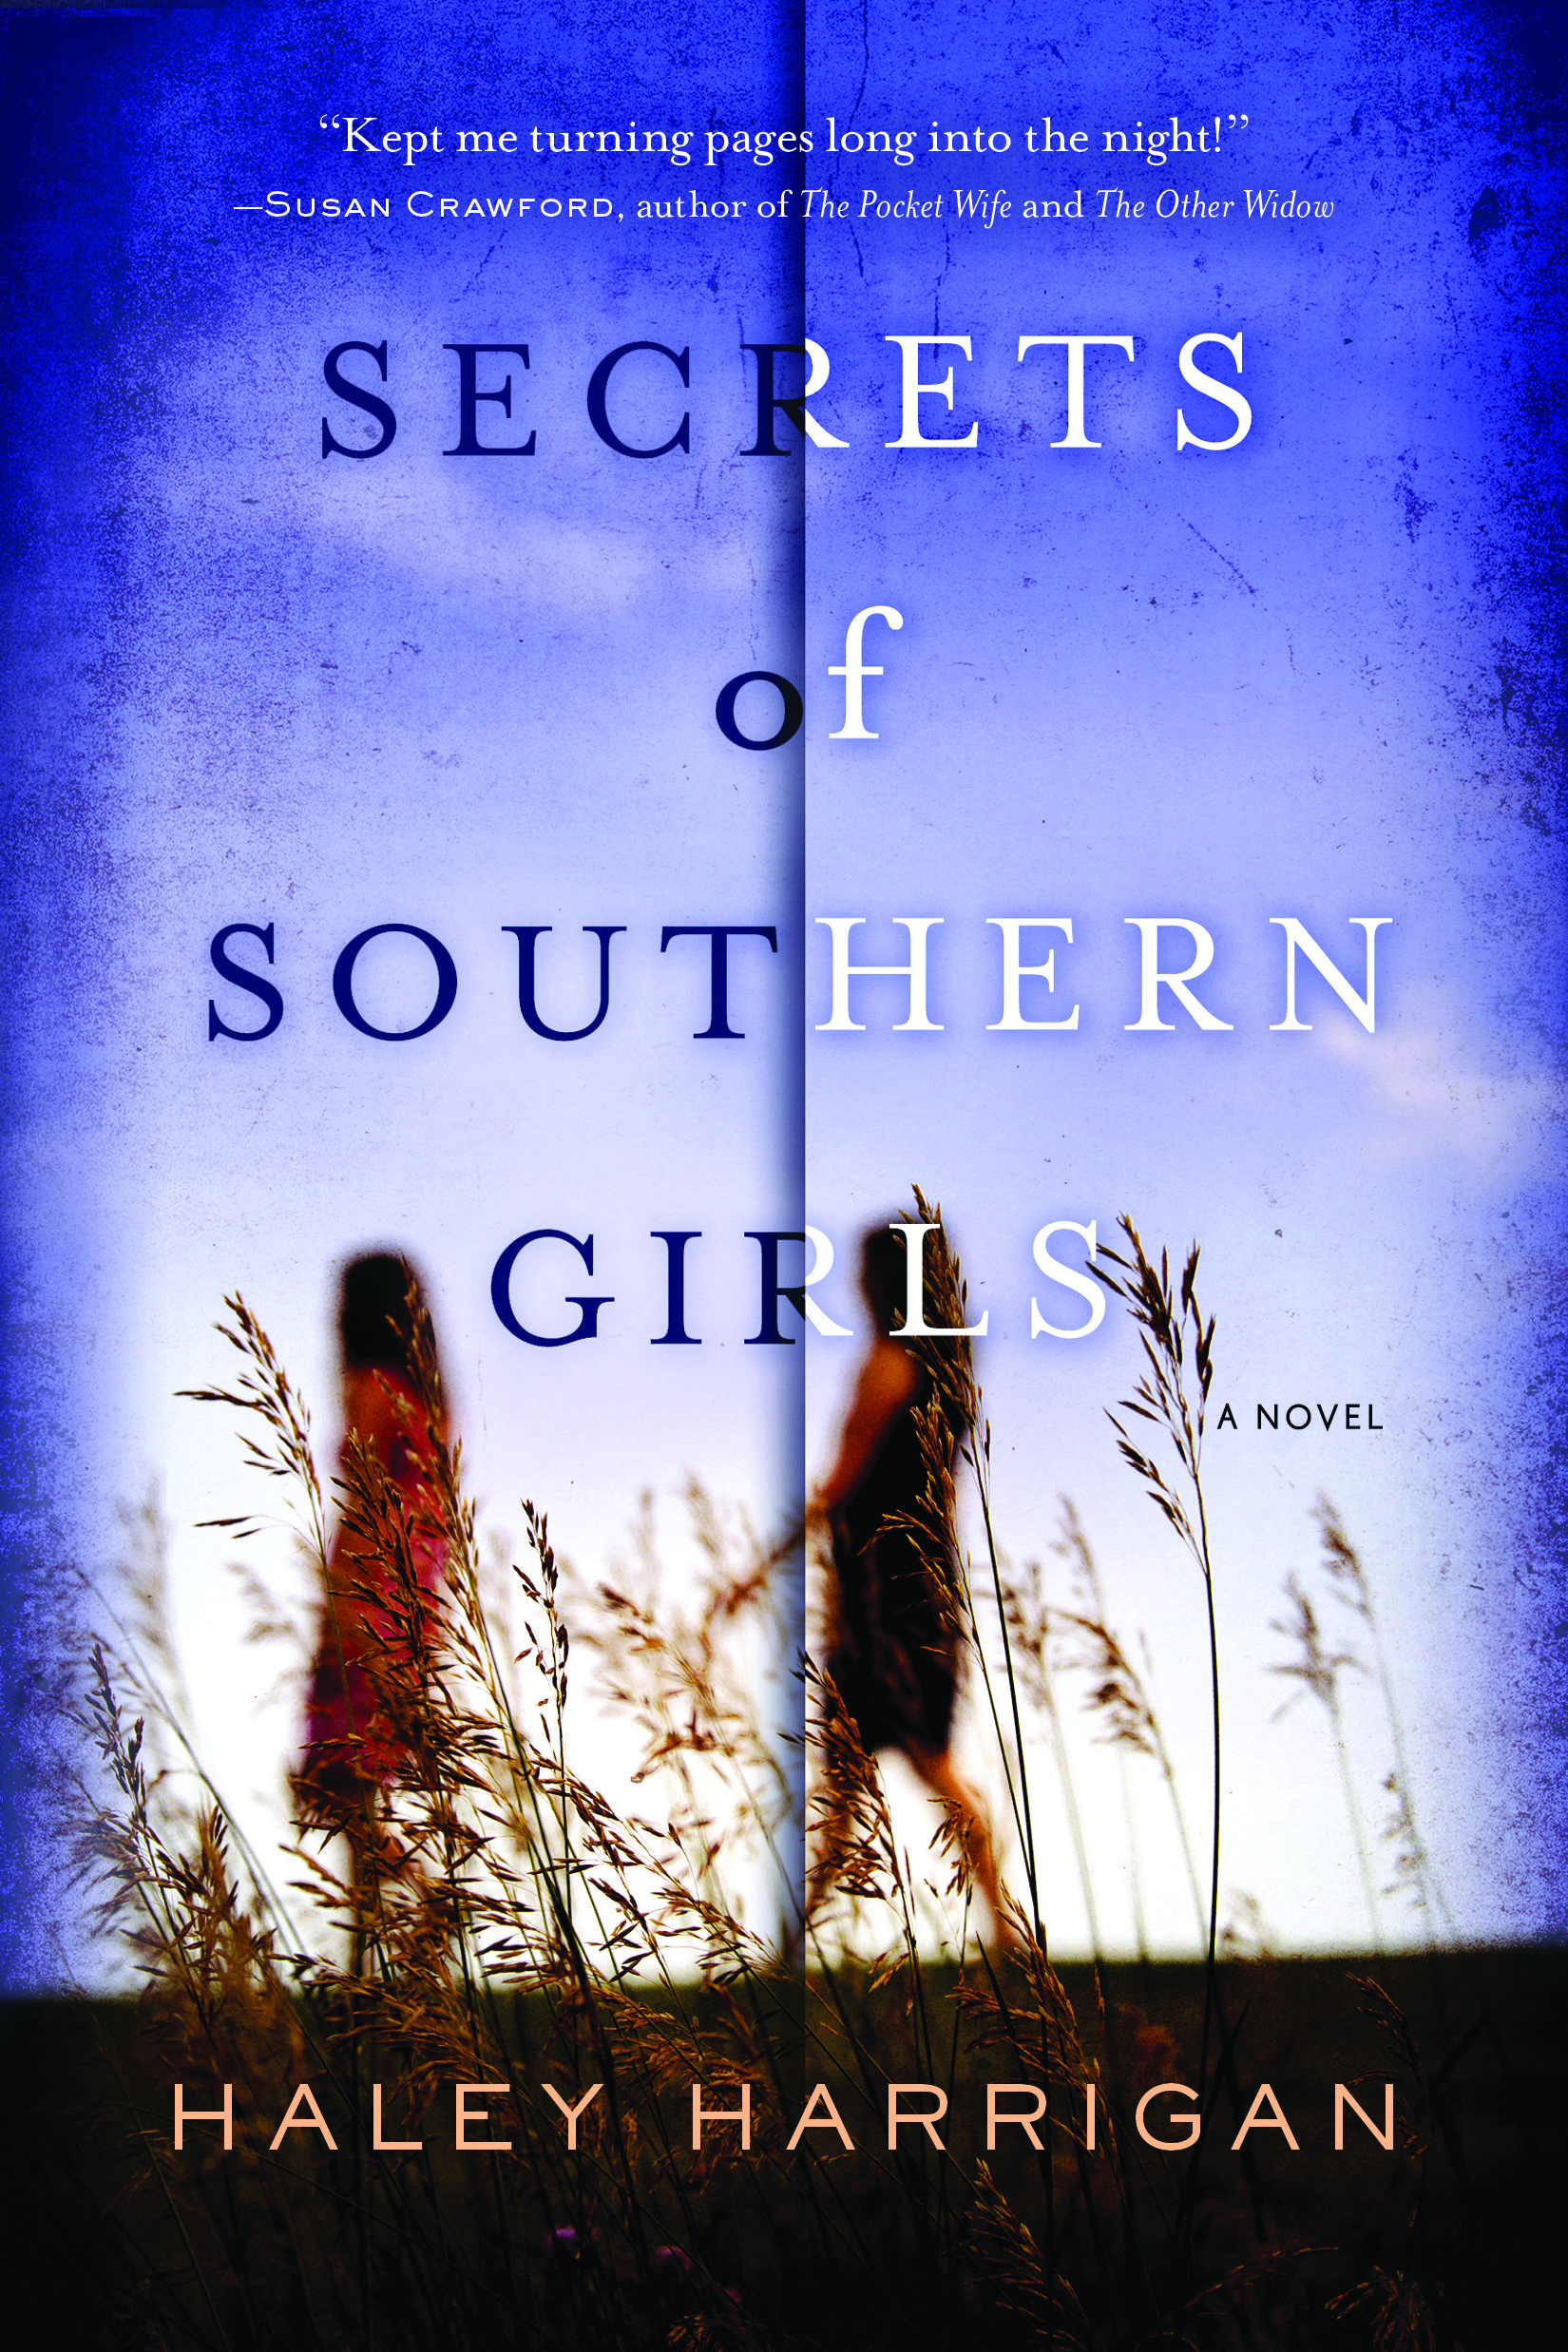 Interview With Haley Harrigan – SECRETS OF SOUTHERN GIRLS